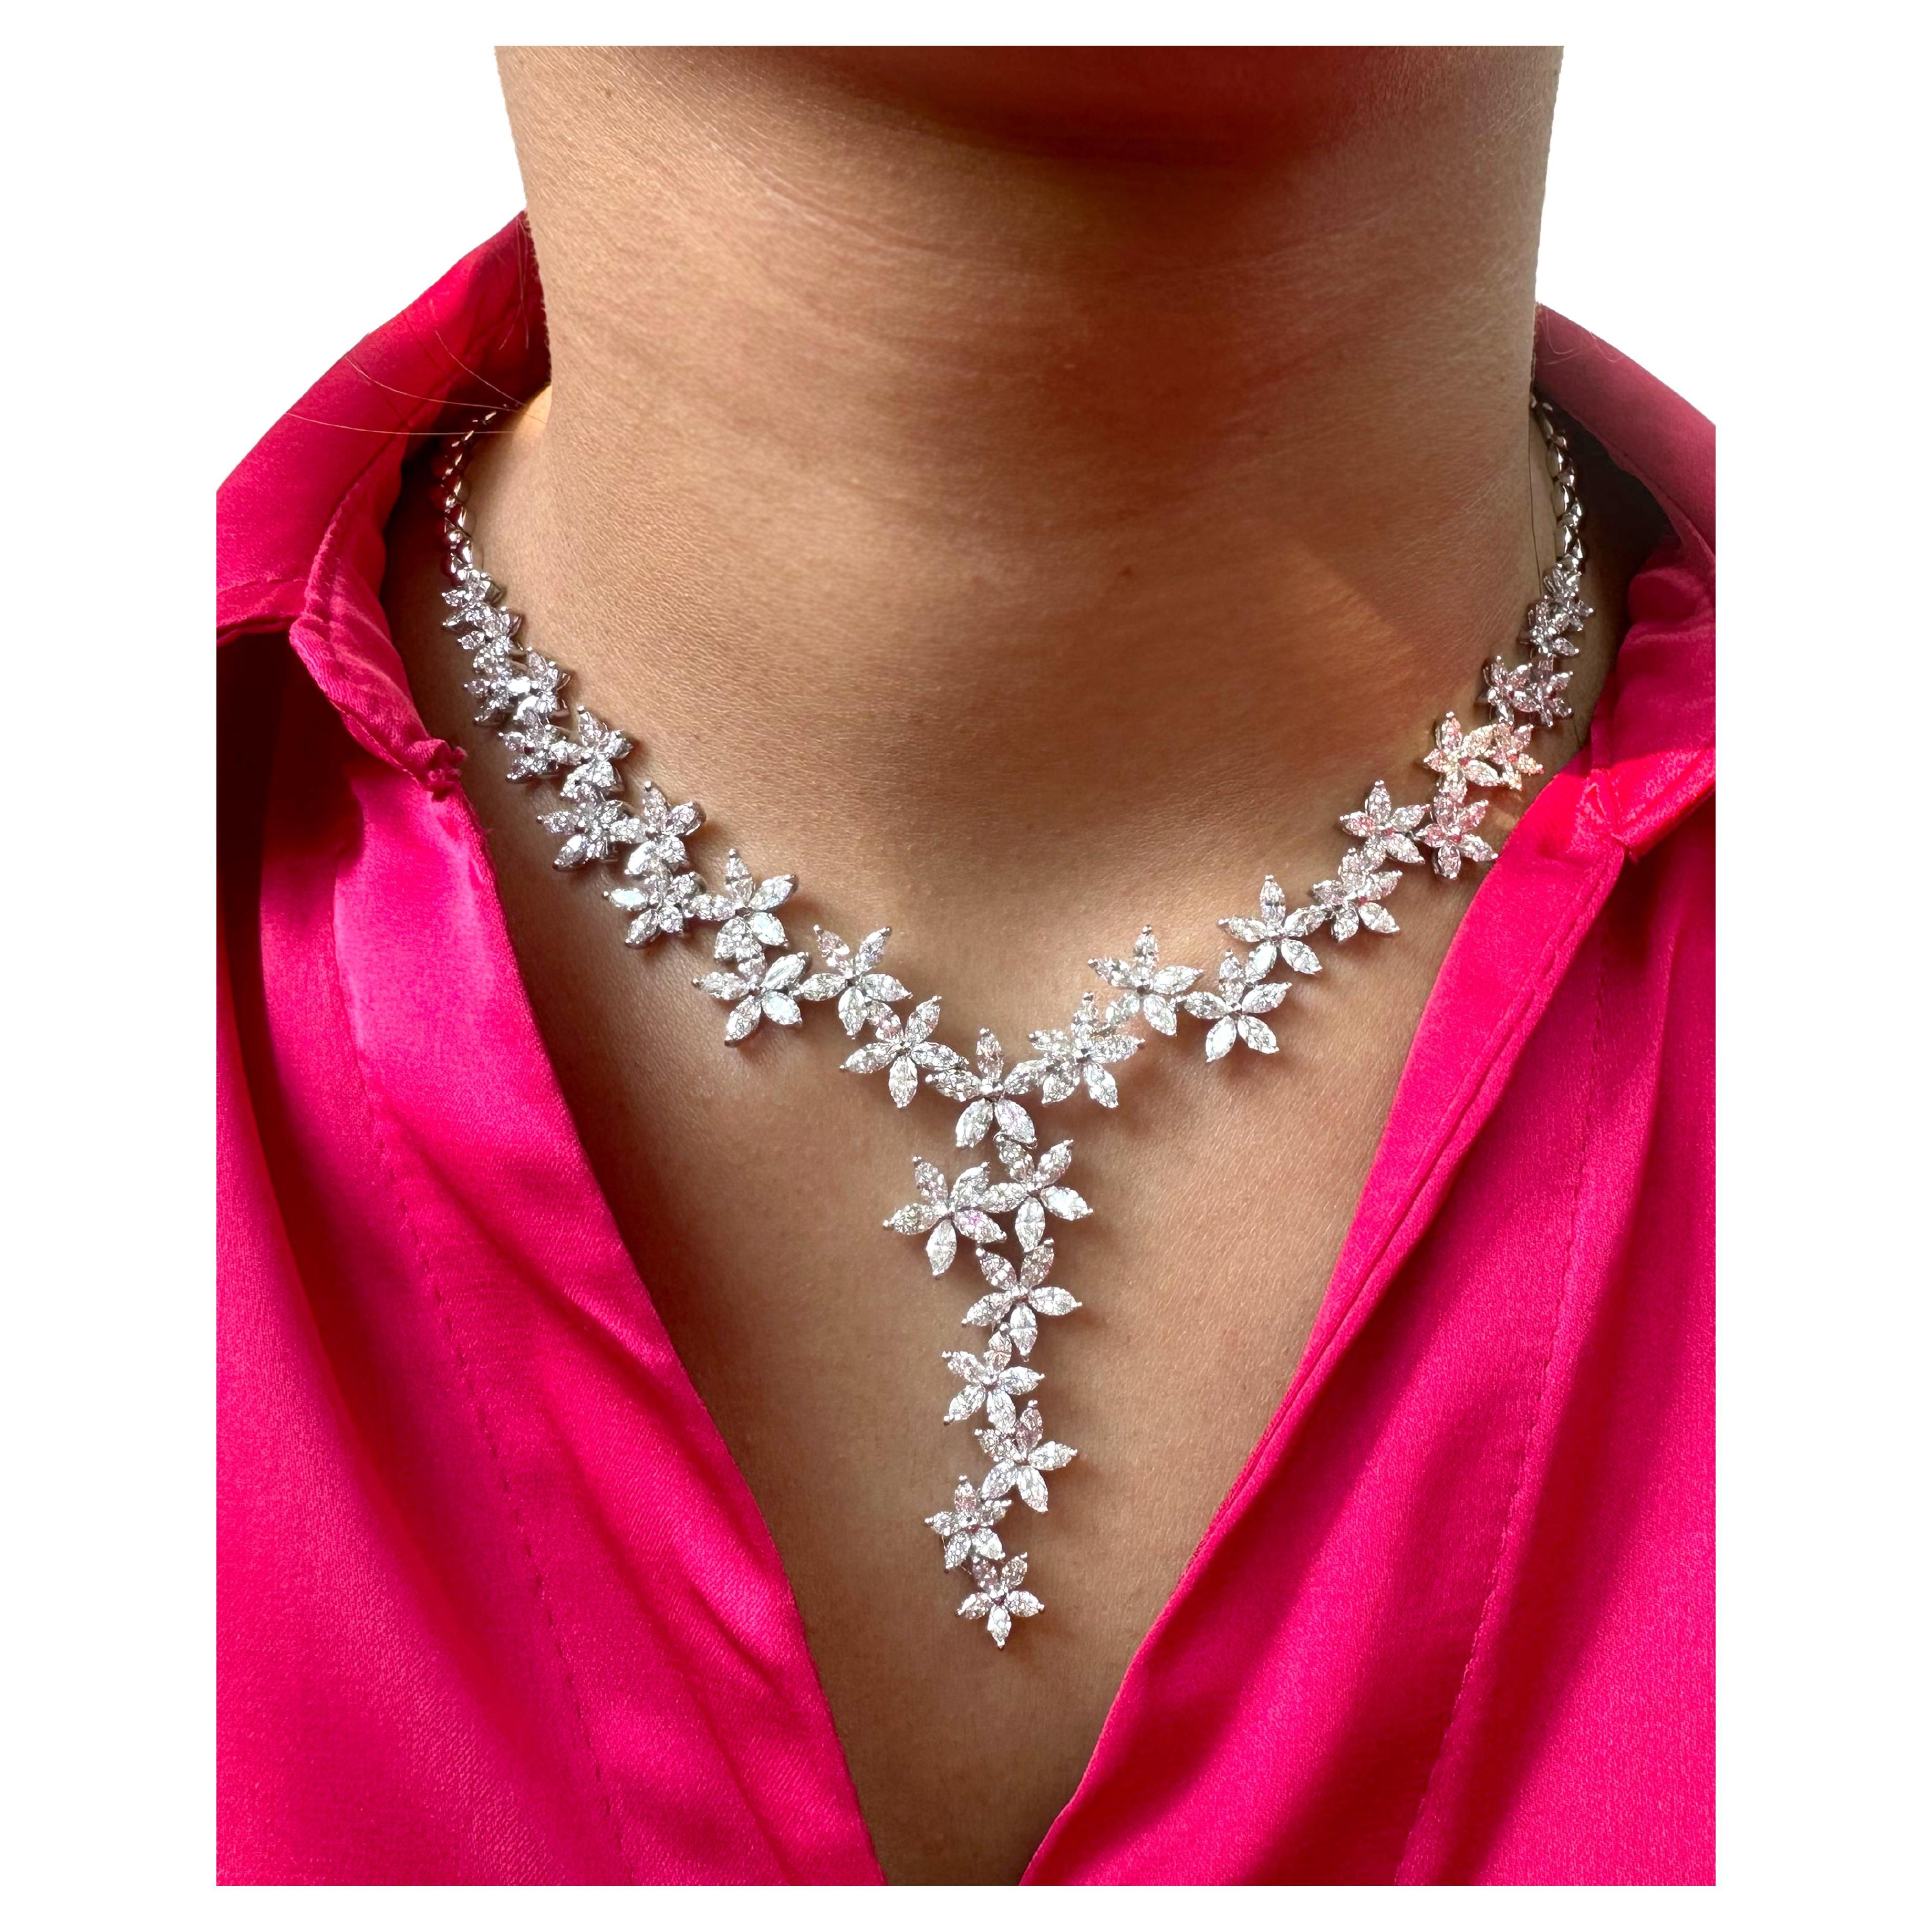 One of a kind floral diamond necklace made with marquise VS-SI natural diamonds